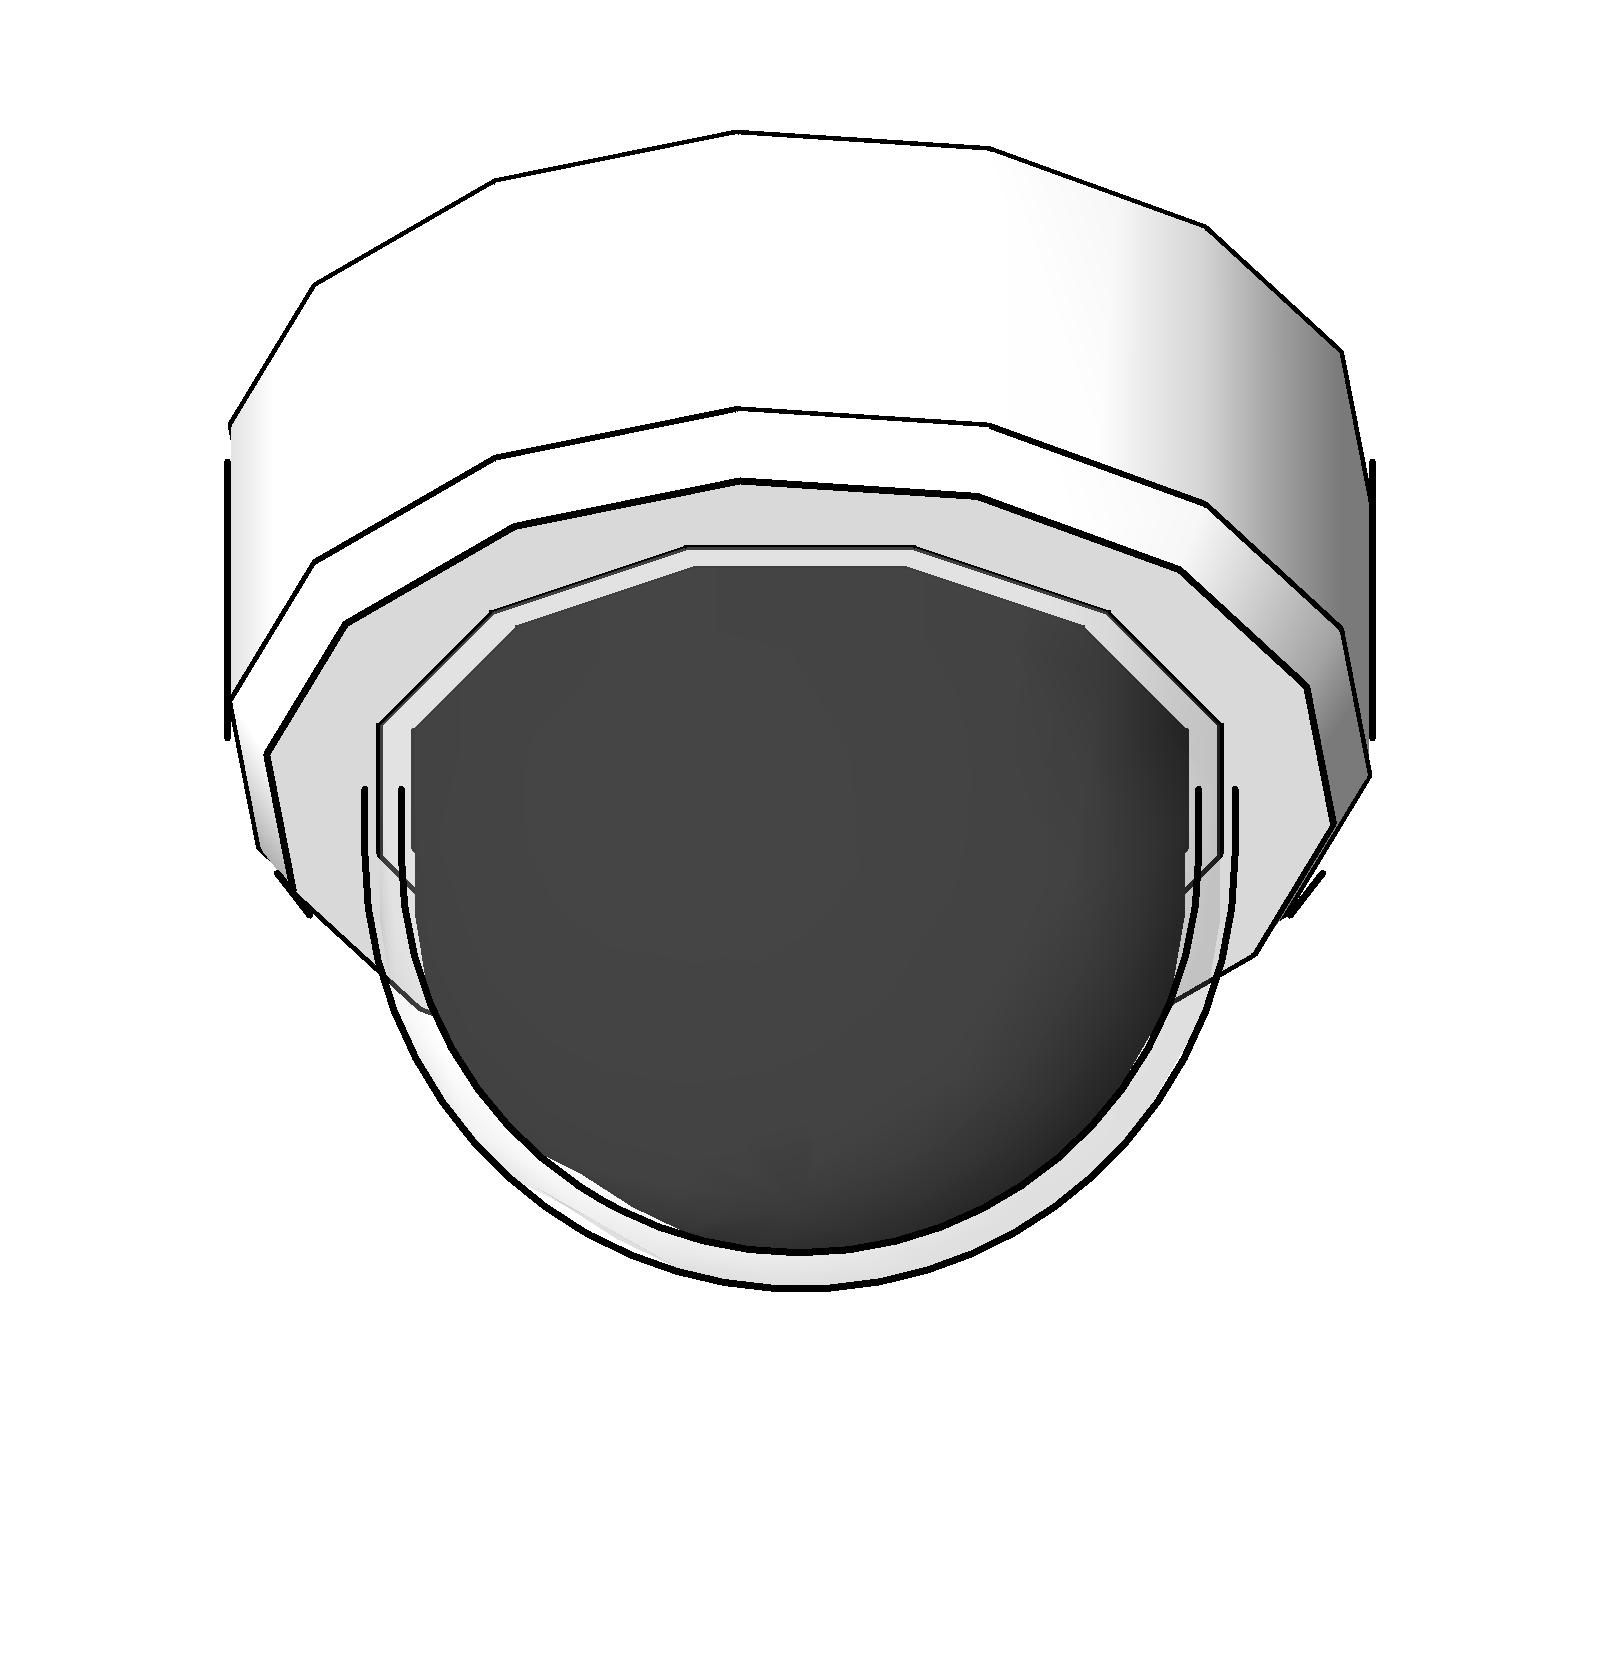 security camera clipart free - photo #29